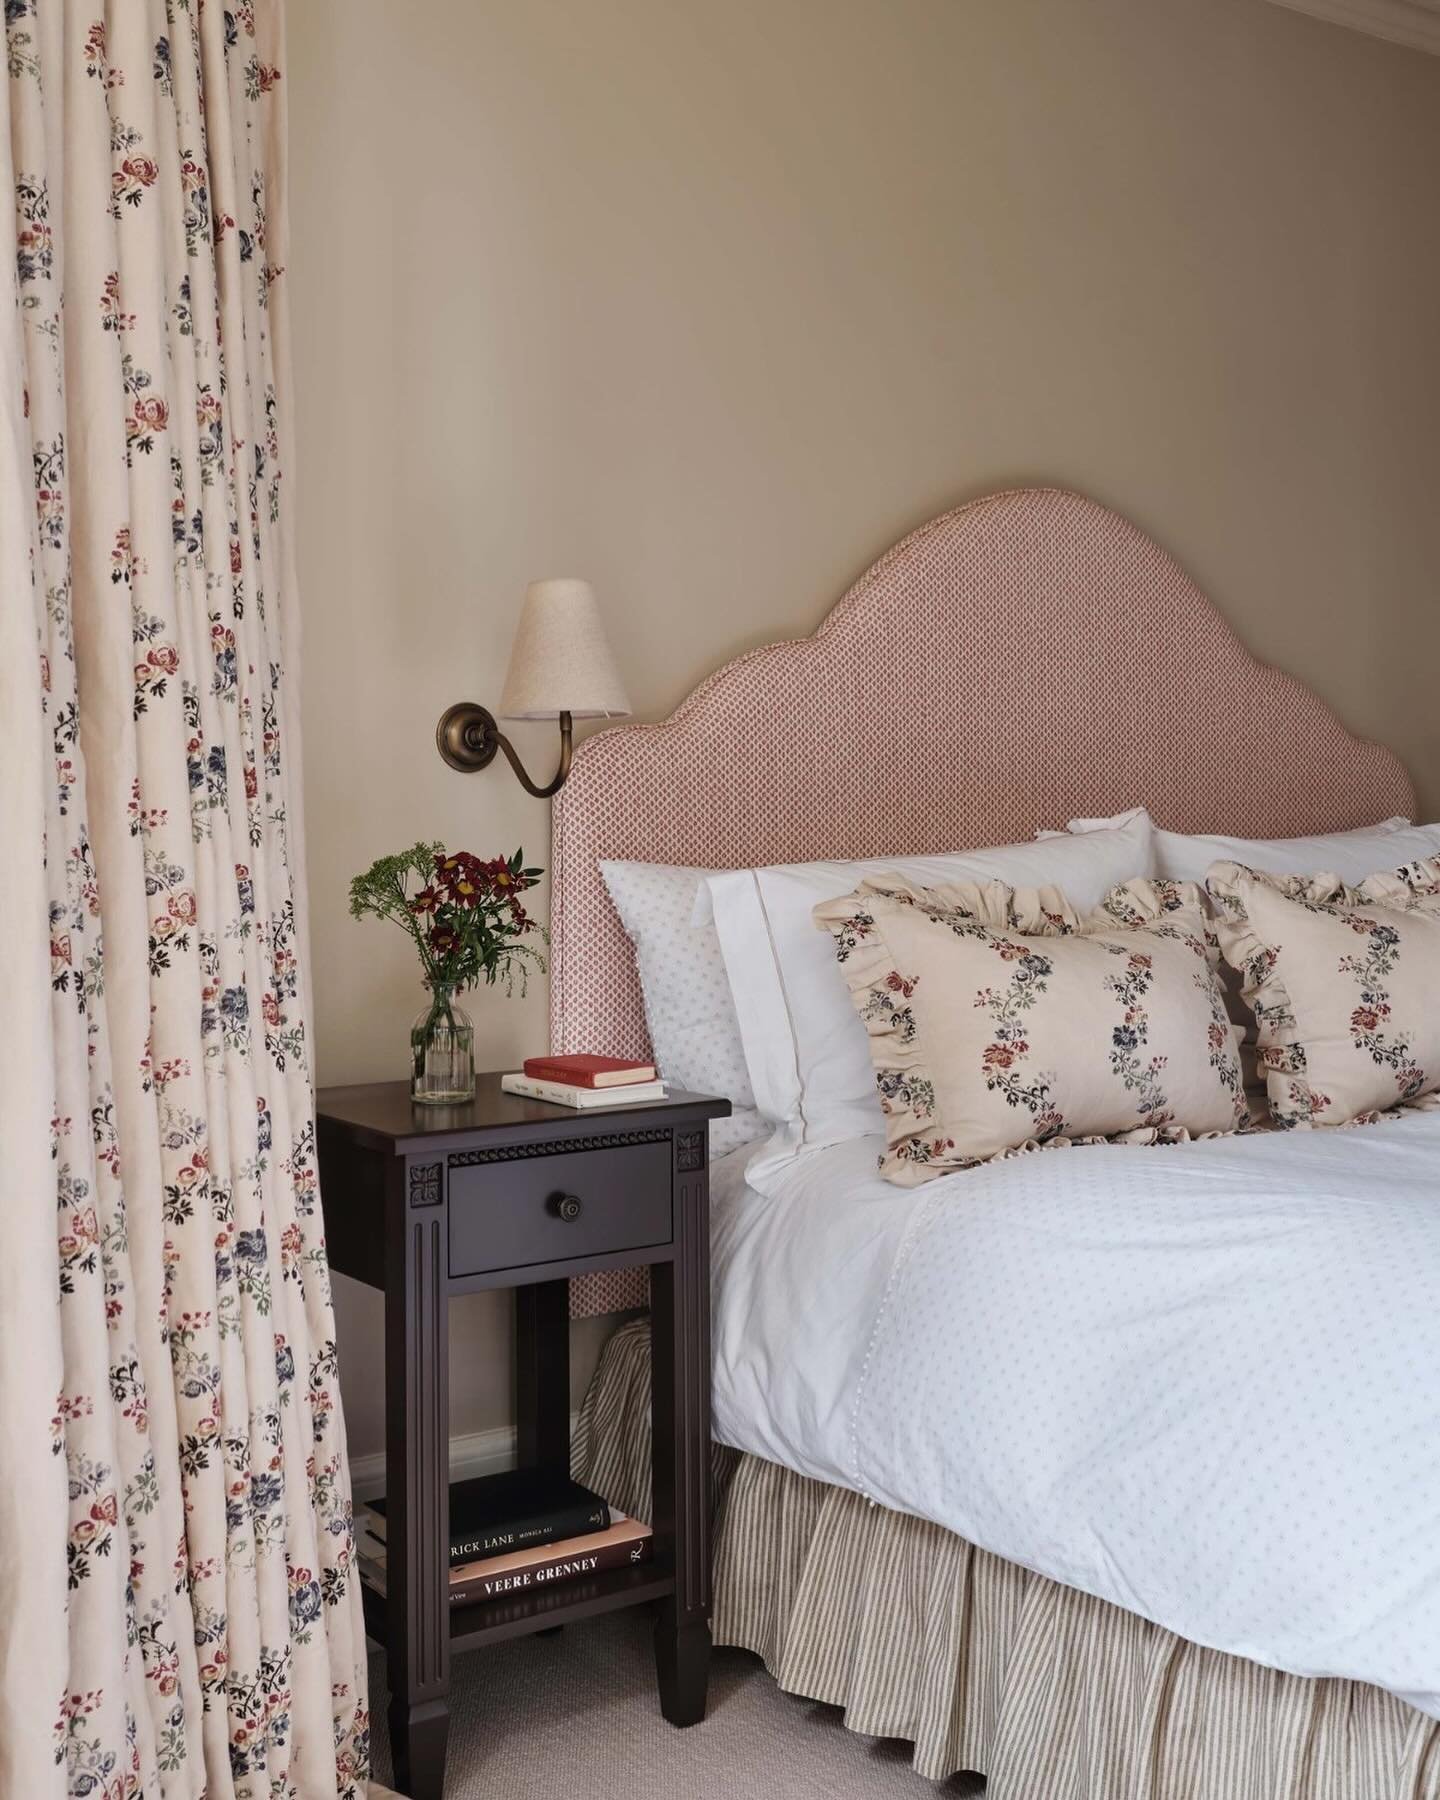 Neutral, Patterns &amp; Bedsides 💜 

When redesigning the main bedroom of our countryside manor project we wanted to create a neutral oasis to retreat too after a long day at work! 

Our client had pre-made curtains, headboard and valance before our